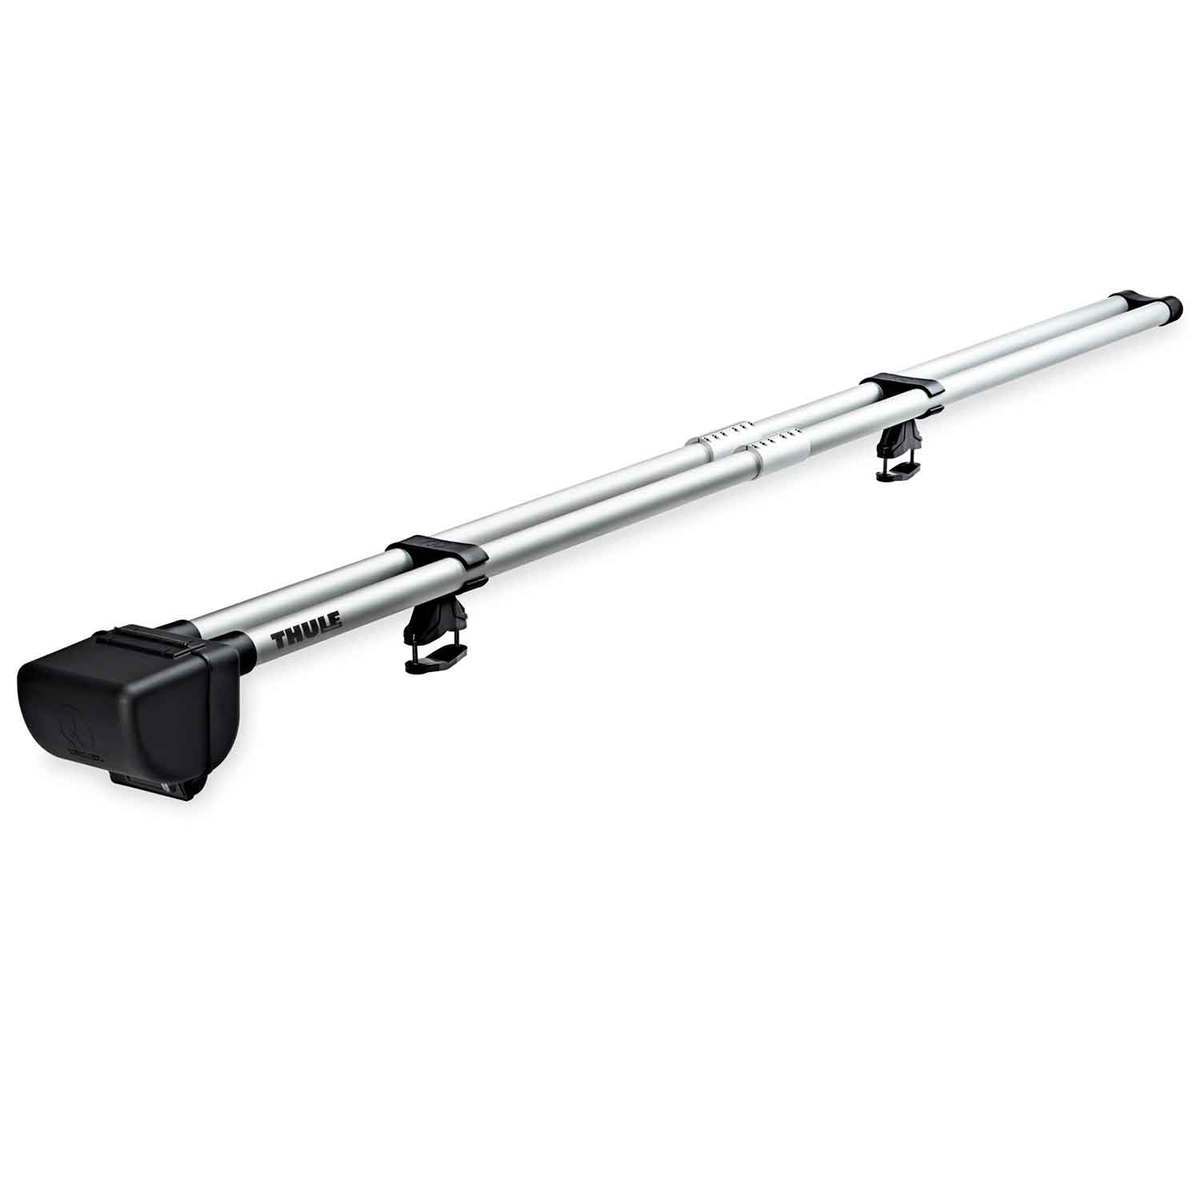 Thule RodVault 4 Fly Fishing Rod and Reel Combo Rod Case - Silver/Black,  10.6ft